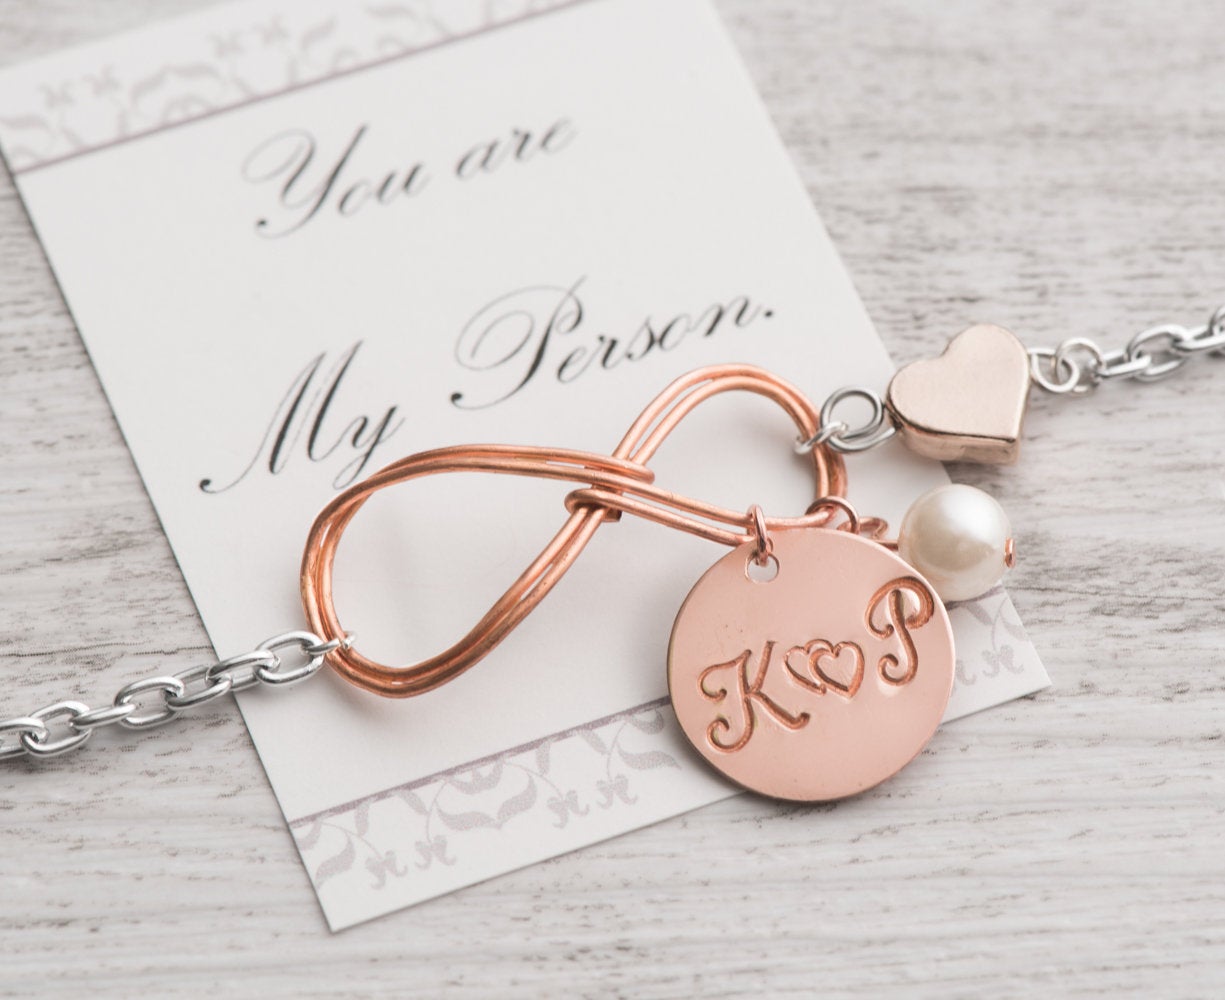 Hand Stamped Personalized Bracelet, Rose Gold Infinity Bracelet Engraved 2 Initial